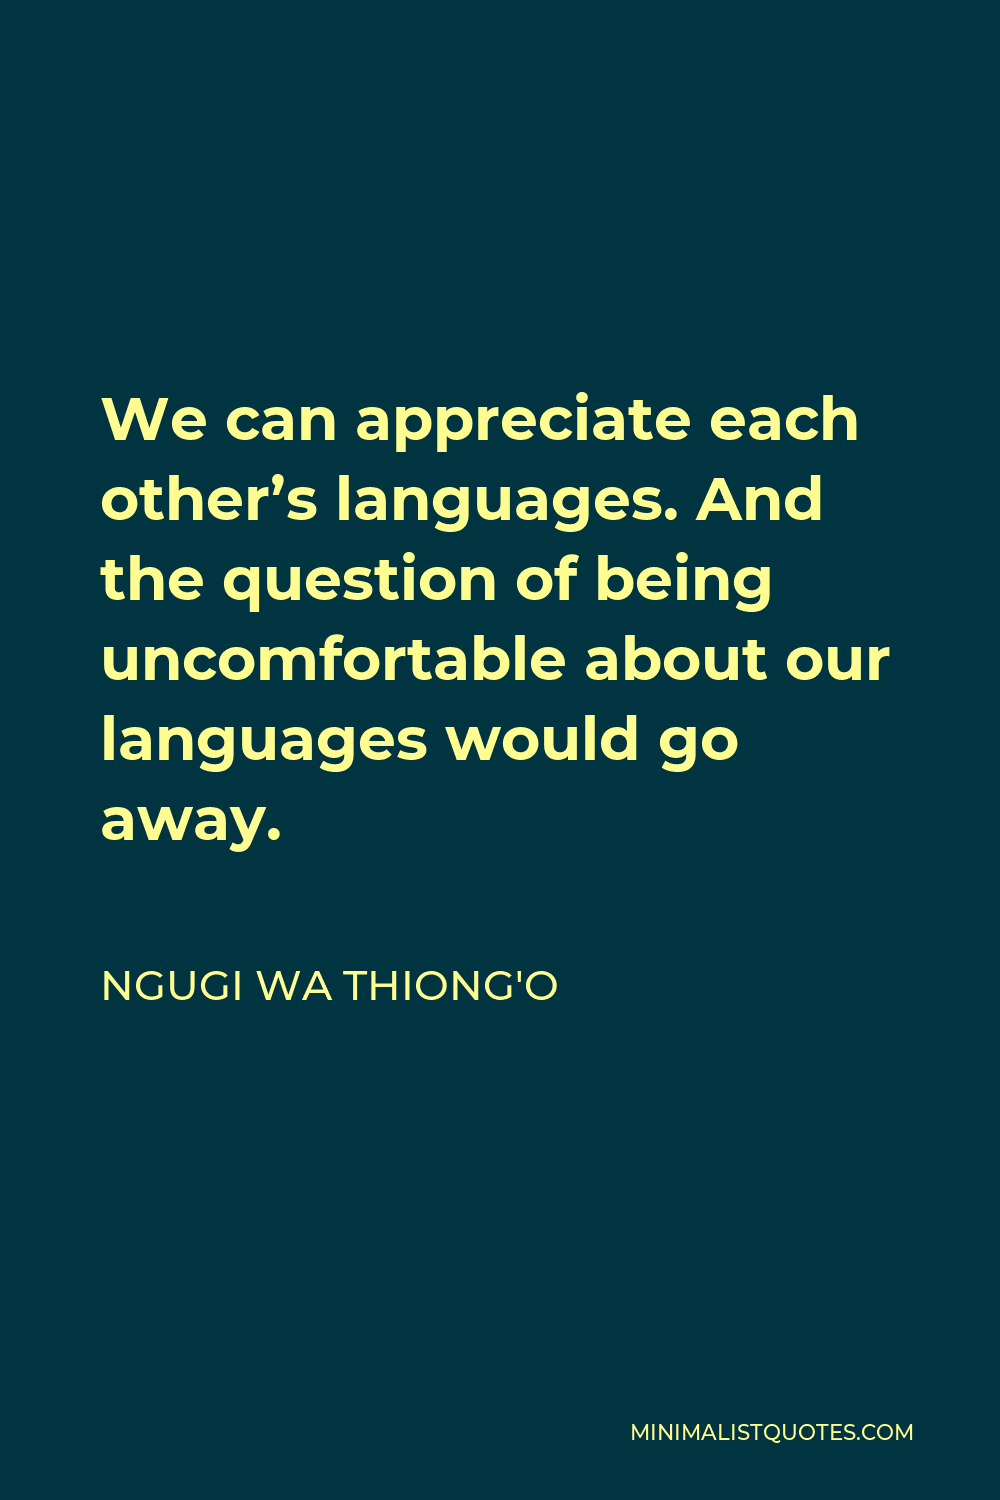 Ngugi wa Thiong'o Quote - We can appreciate each other’s languages. And the question of being uncomfortable about our languages would go away.